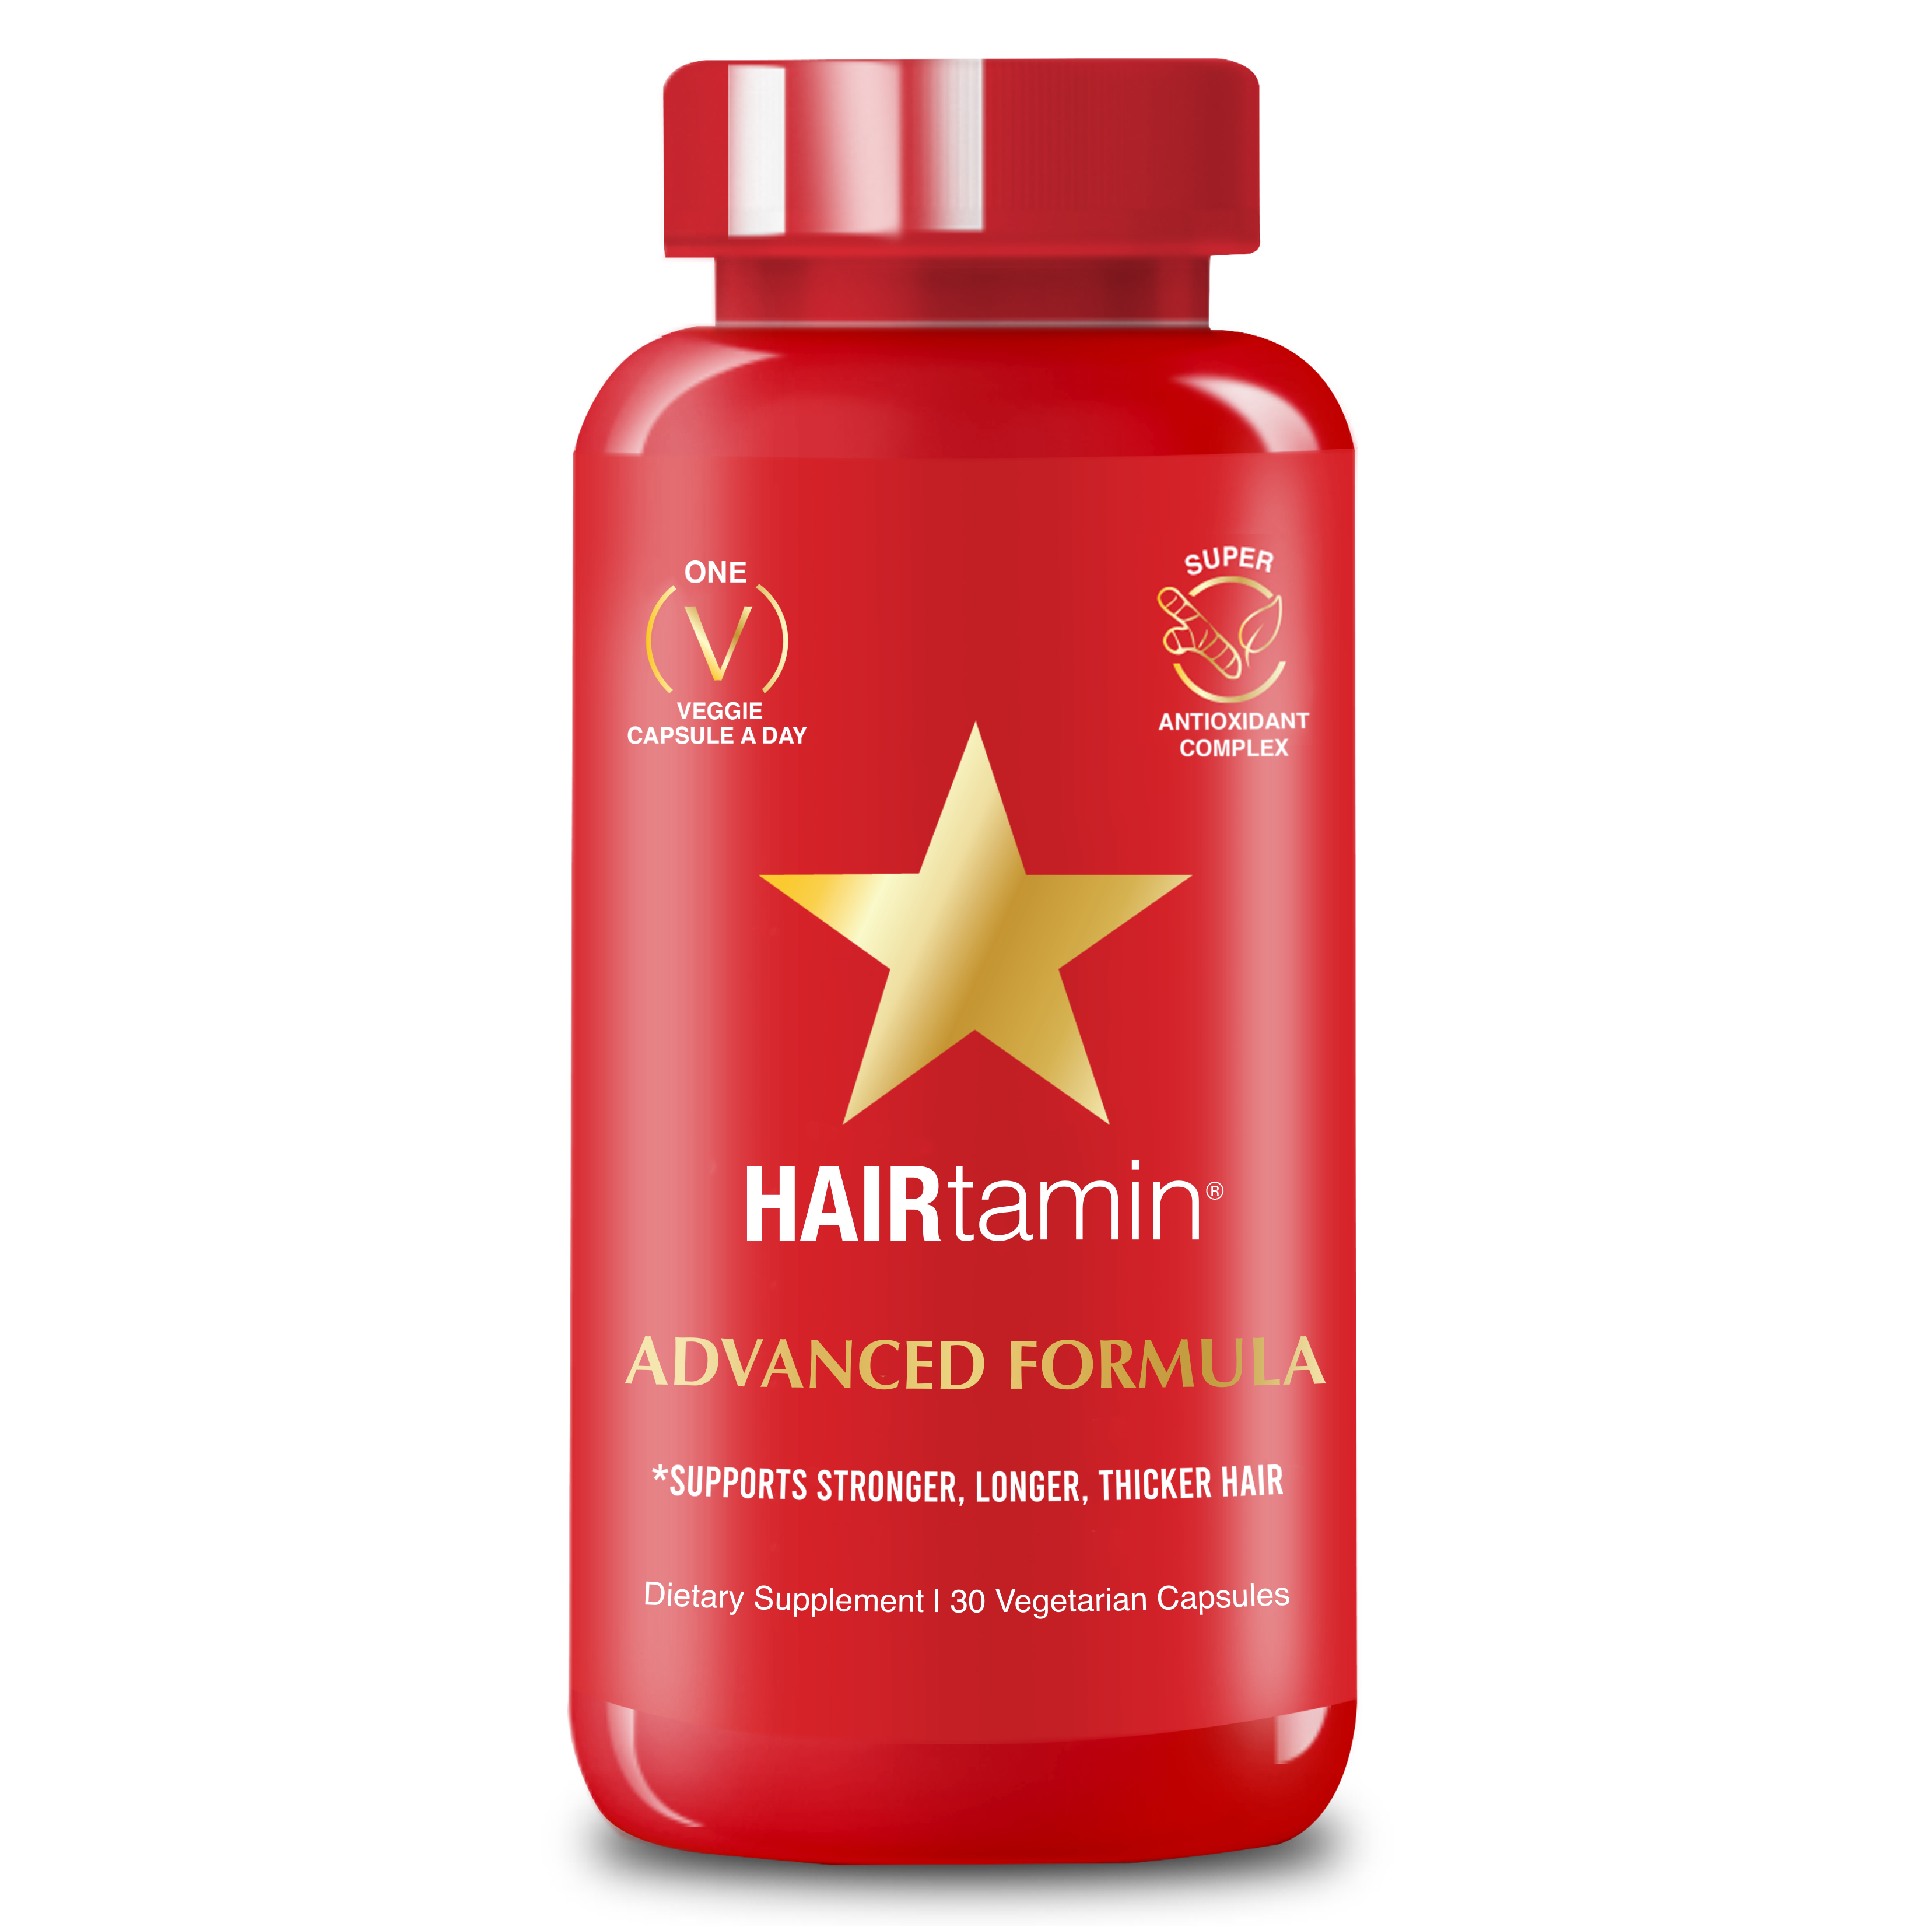 HAIRTAMIN..Keeping Your Hair Healthy and Fabulous